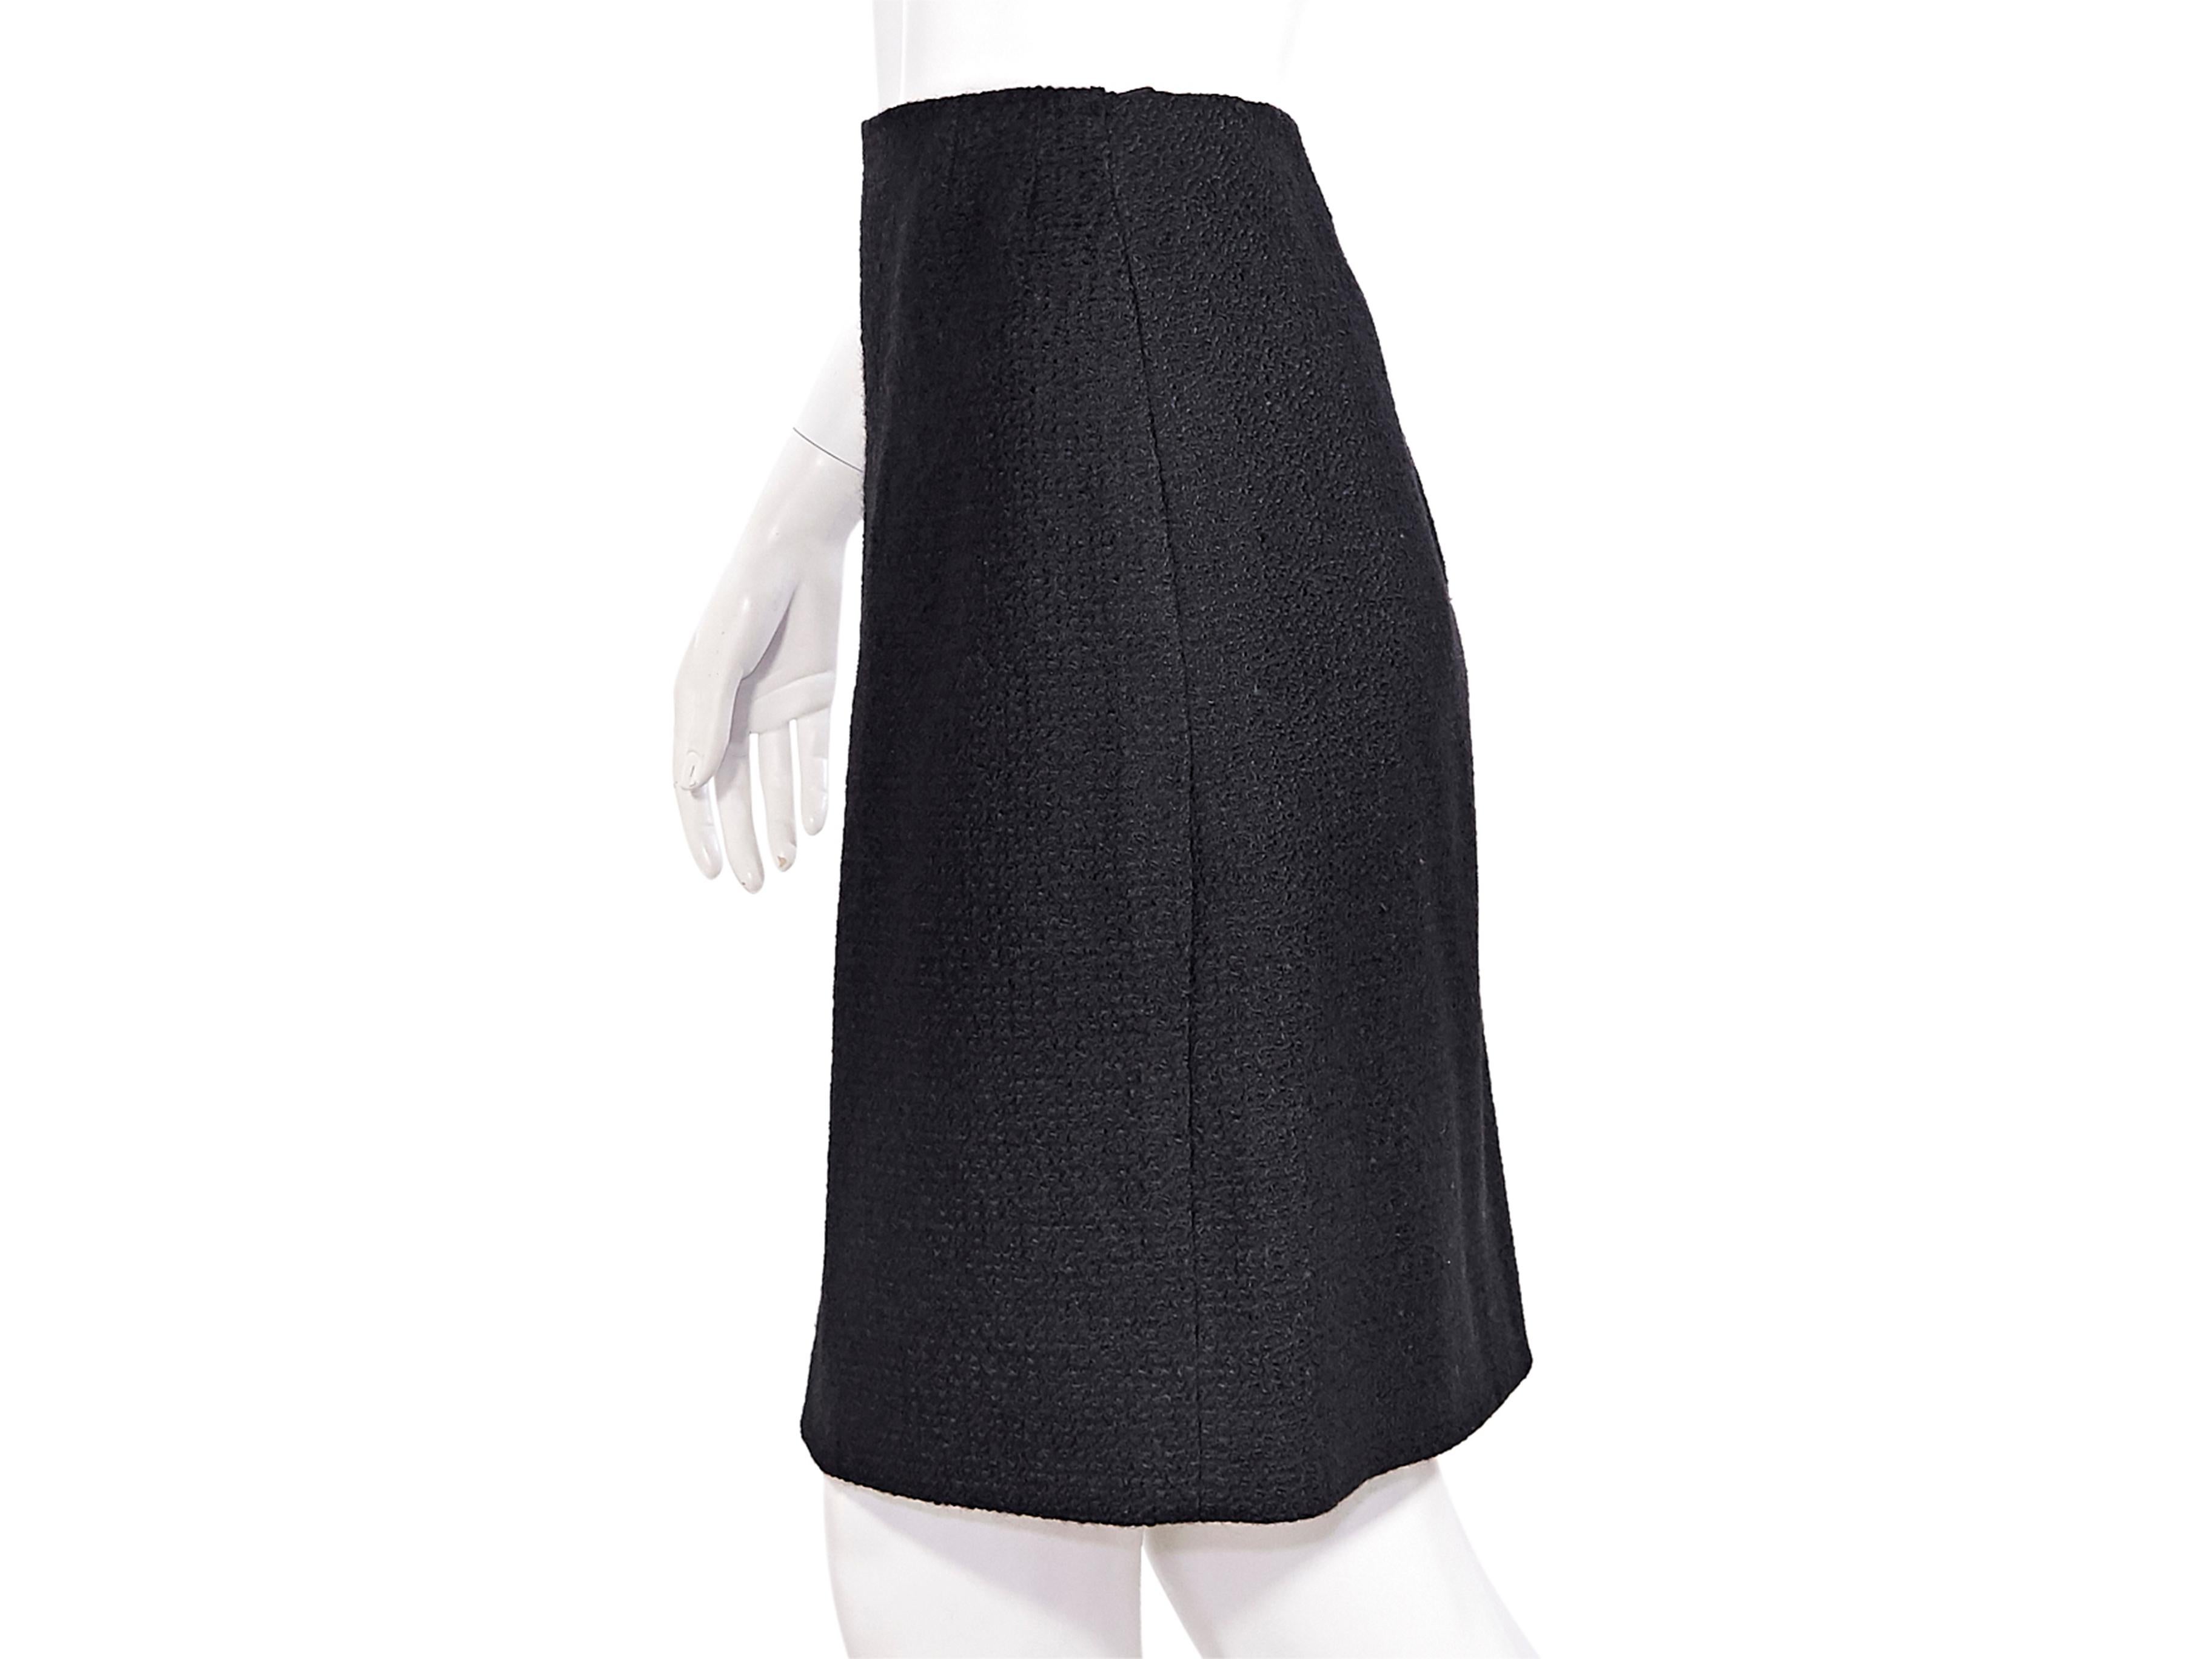 Product details:  Vintage black bouclé mini skirt by Chanel Creations. High-waist. Concealed zip back closure. Style yours with a polka dot-patterned top. 29